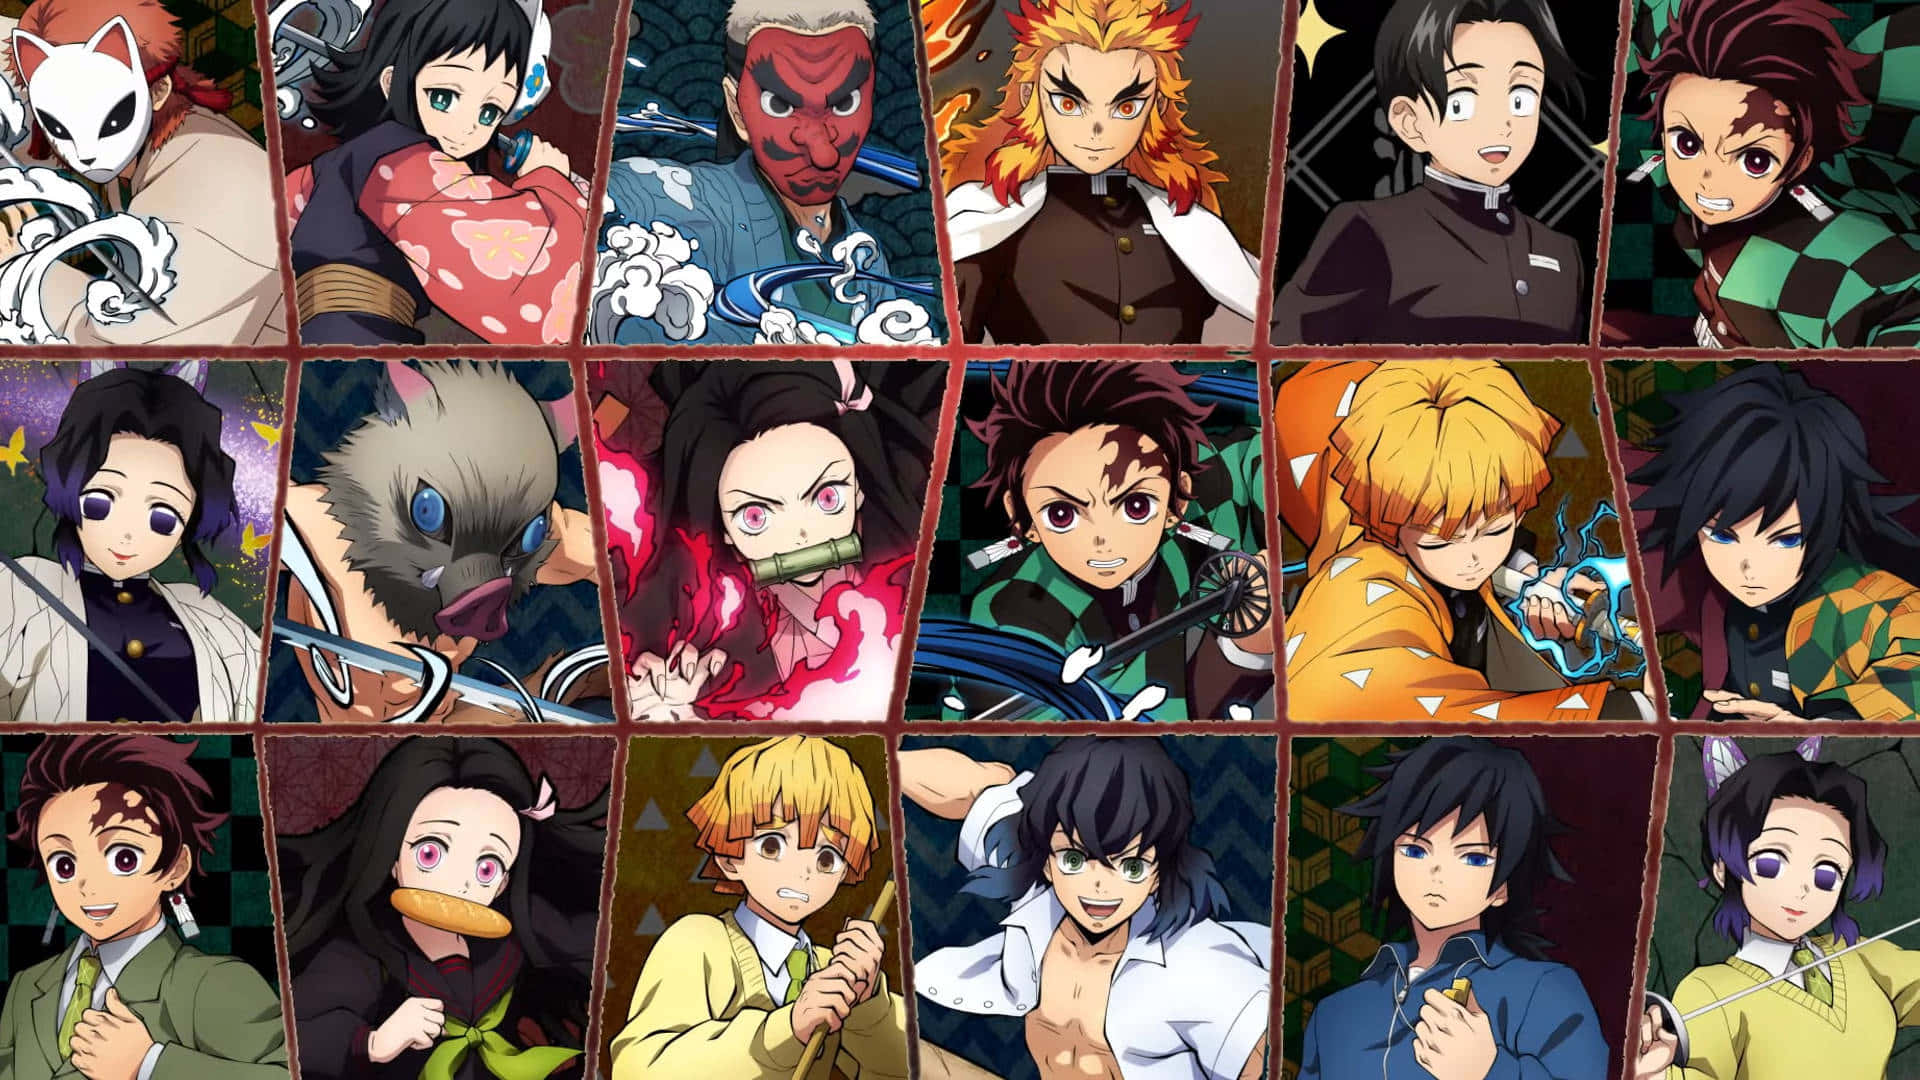 Demon Slayer Characters Gathered for Battle Wallpaper